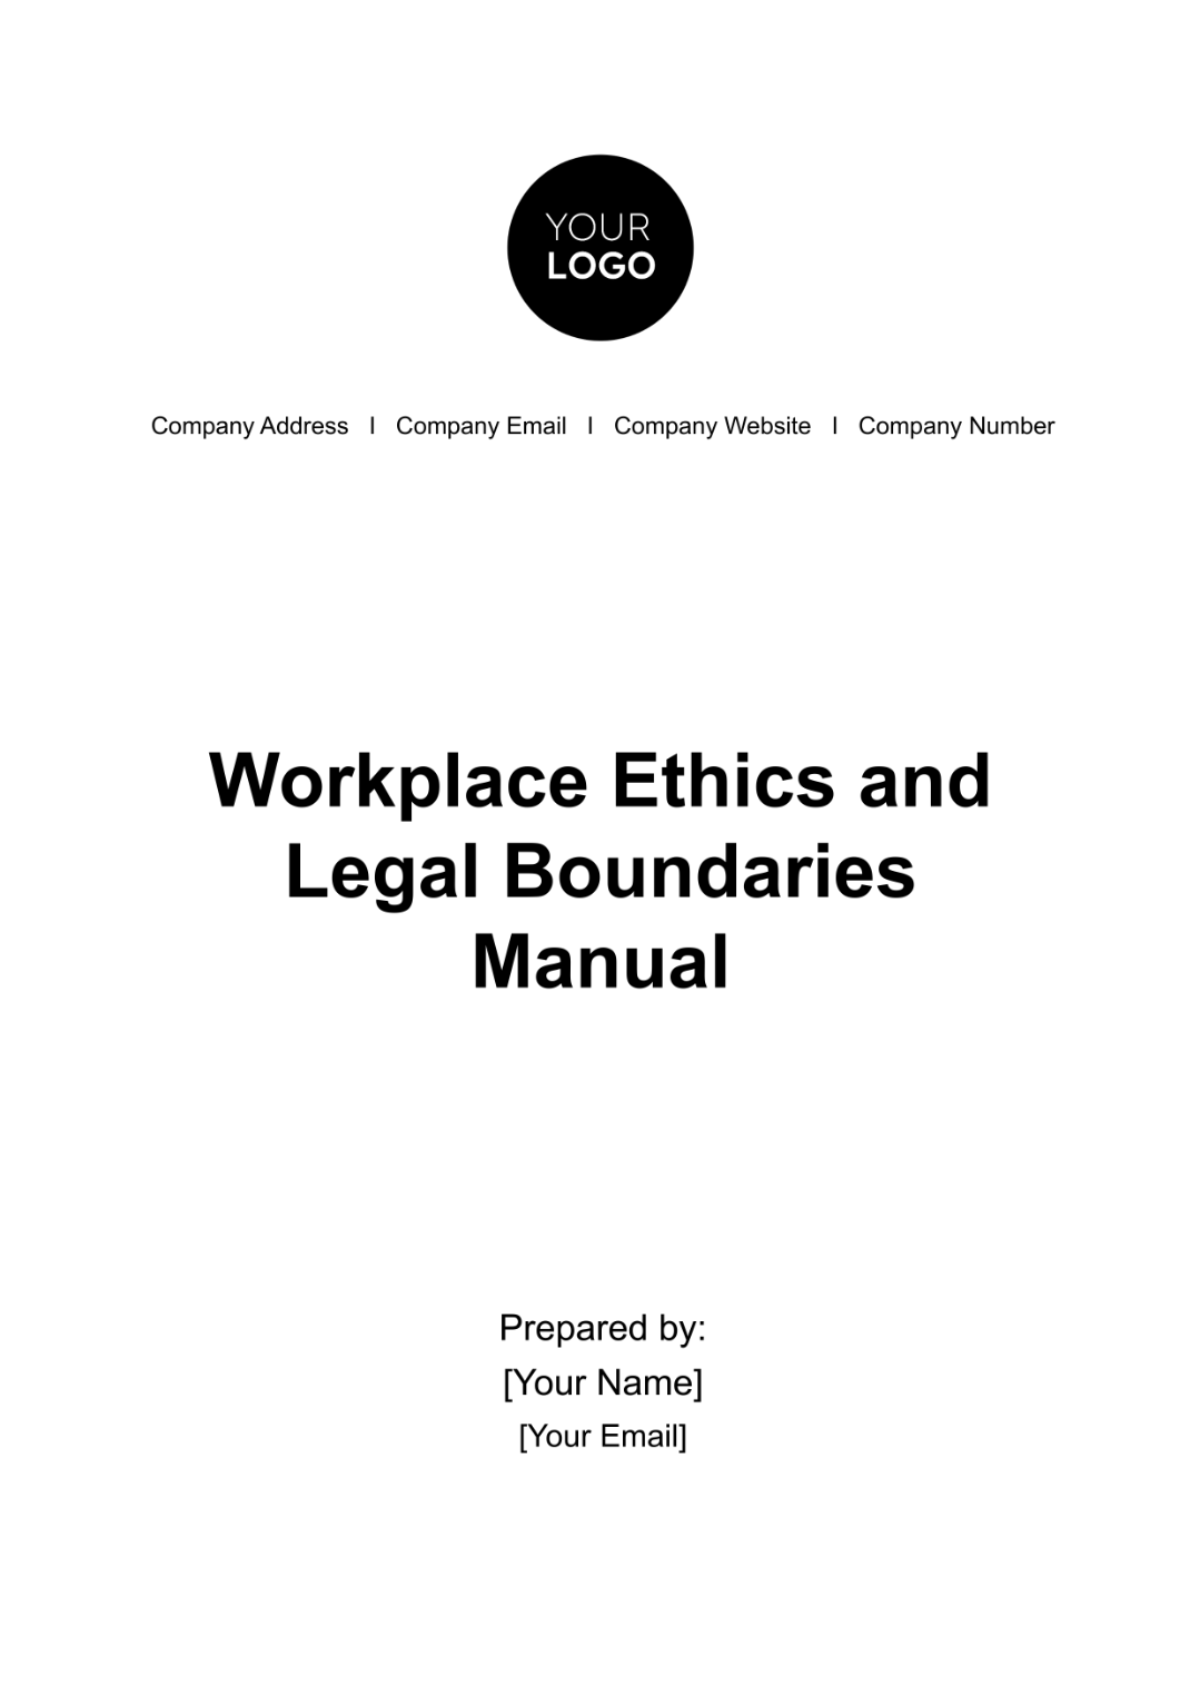 Workplace Ethics and Legal Boundaries Manual HR Template